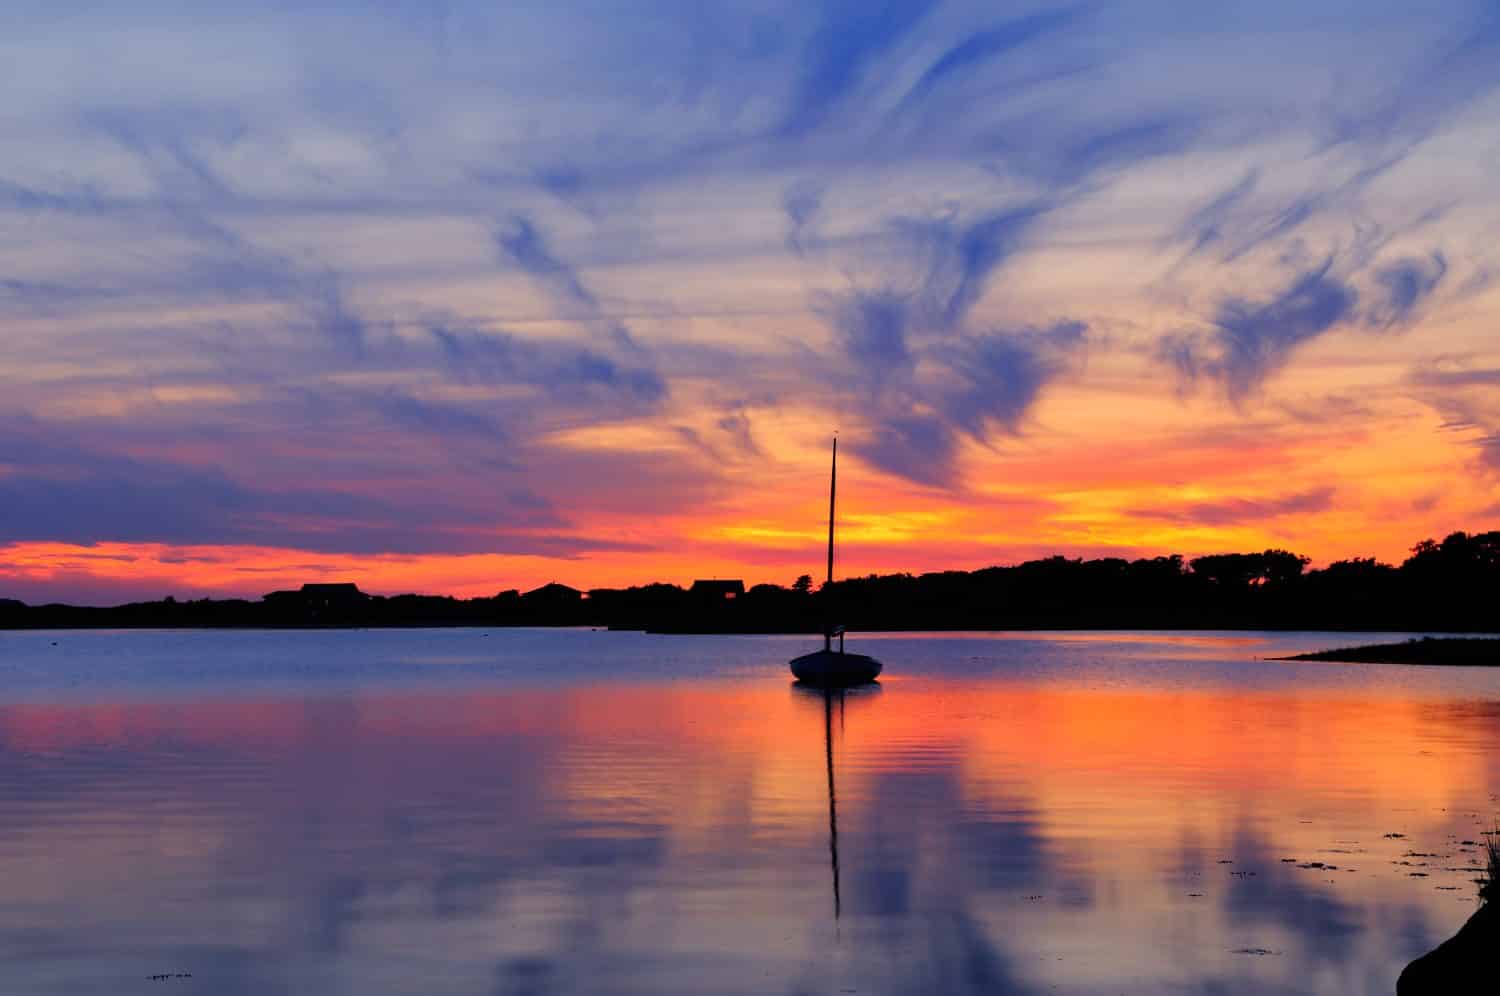 Sunset and sailboat in Martha's Vineyard, Massachusetts. Dramatic sky with vivid orange and blue cloudscape reflected on the water